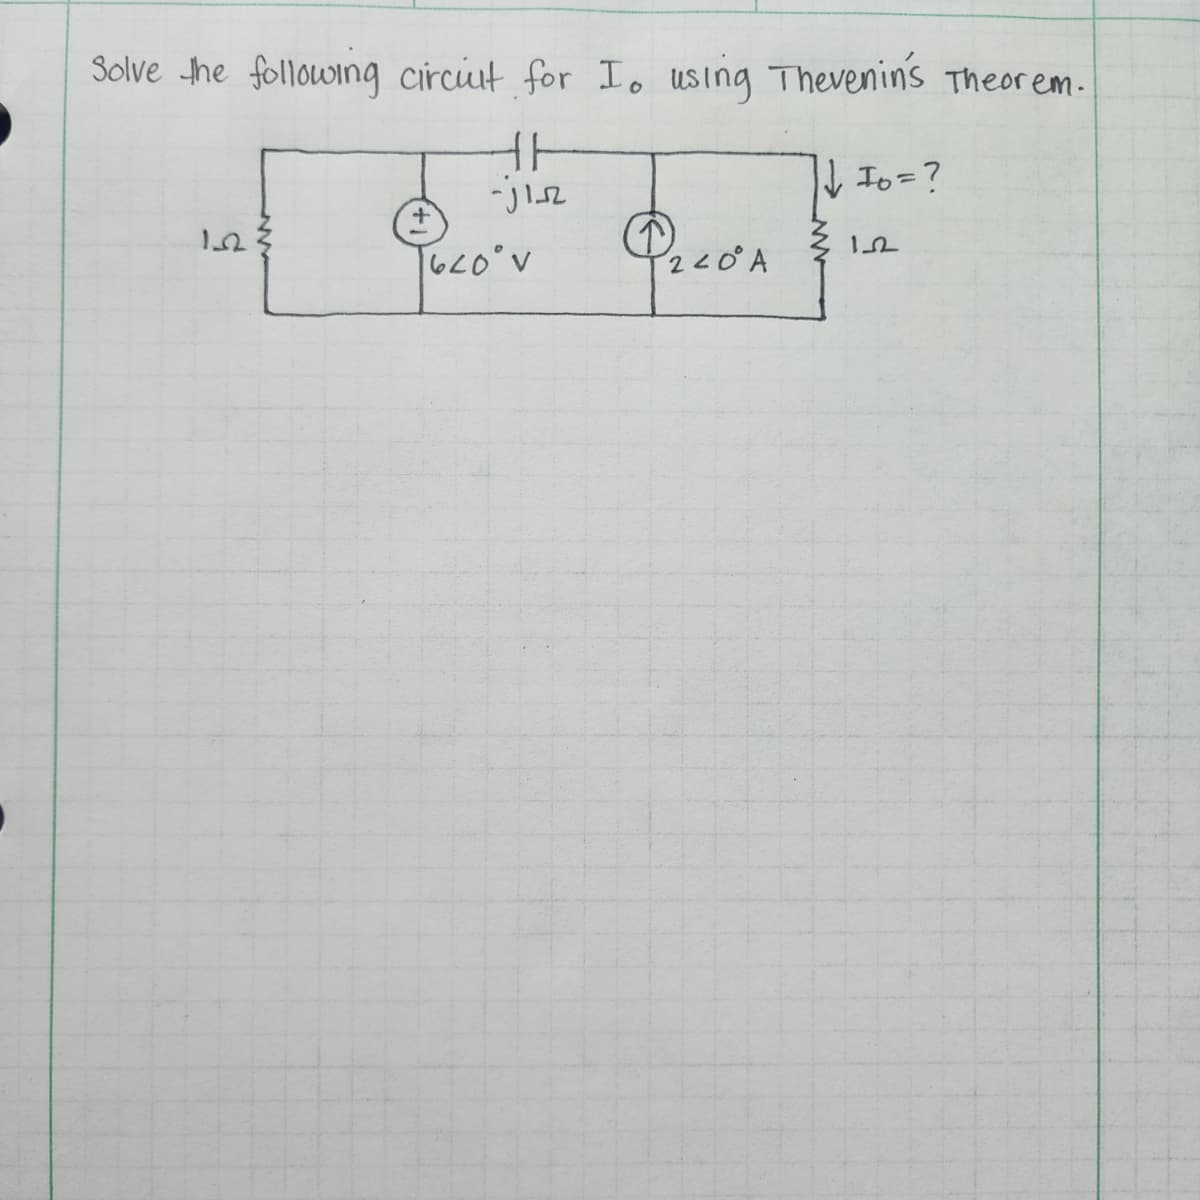 Solve the following circuit for I, using Thevenin's Theorem.
HH
-31-52
|↓ 10 = ?
ΙΩ
√620° V
12
220° A